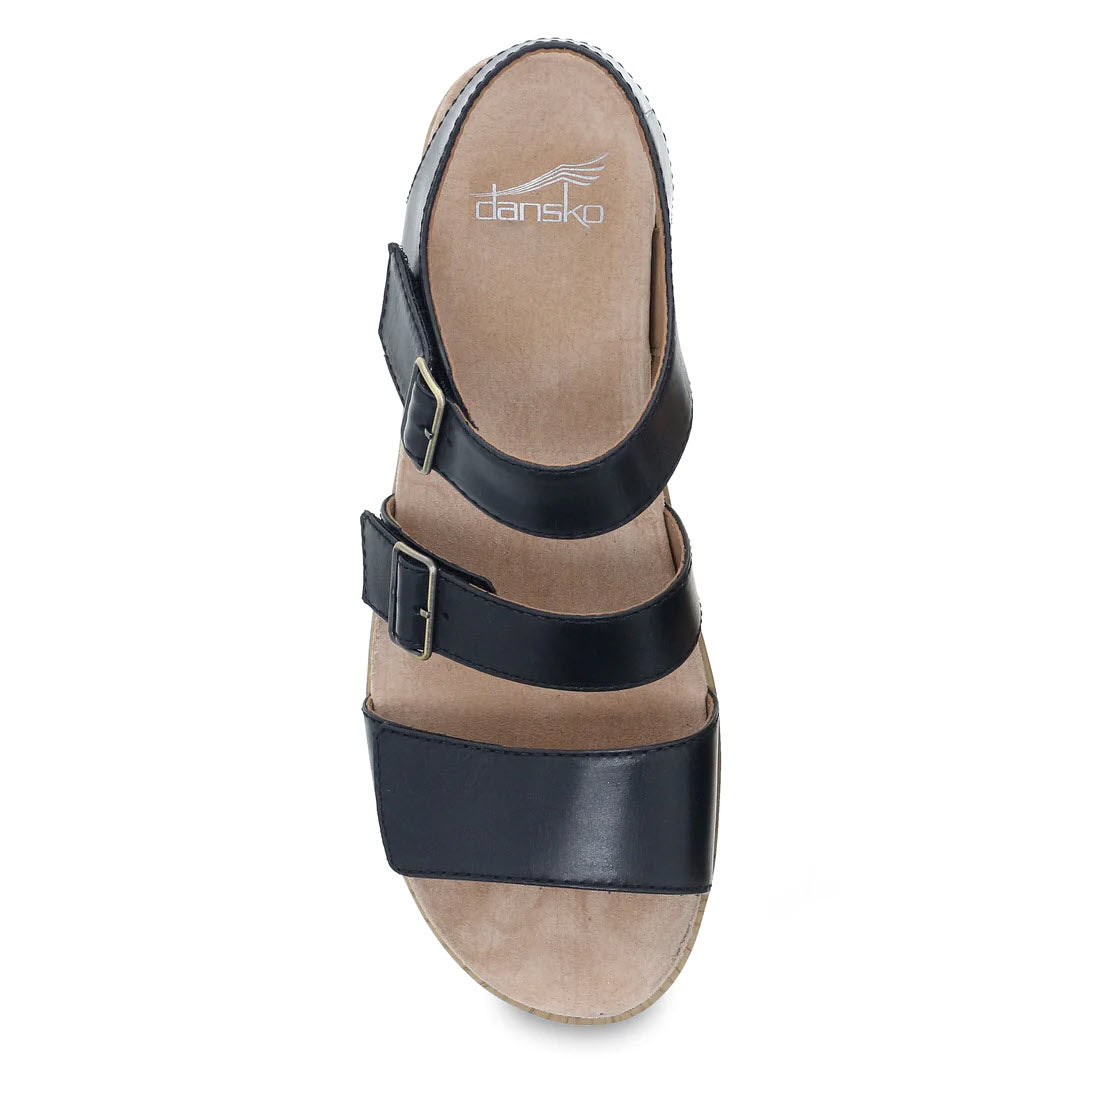 A top view of a black Dansko Malena sandal with triple strap buckles and a tan insole, isolated on a white background.